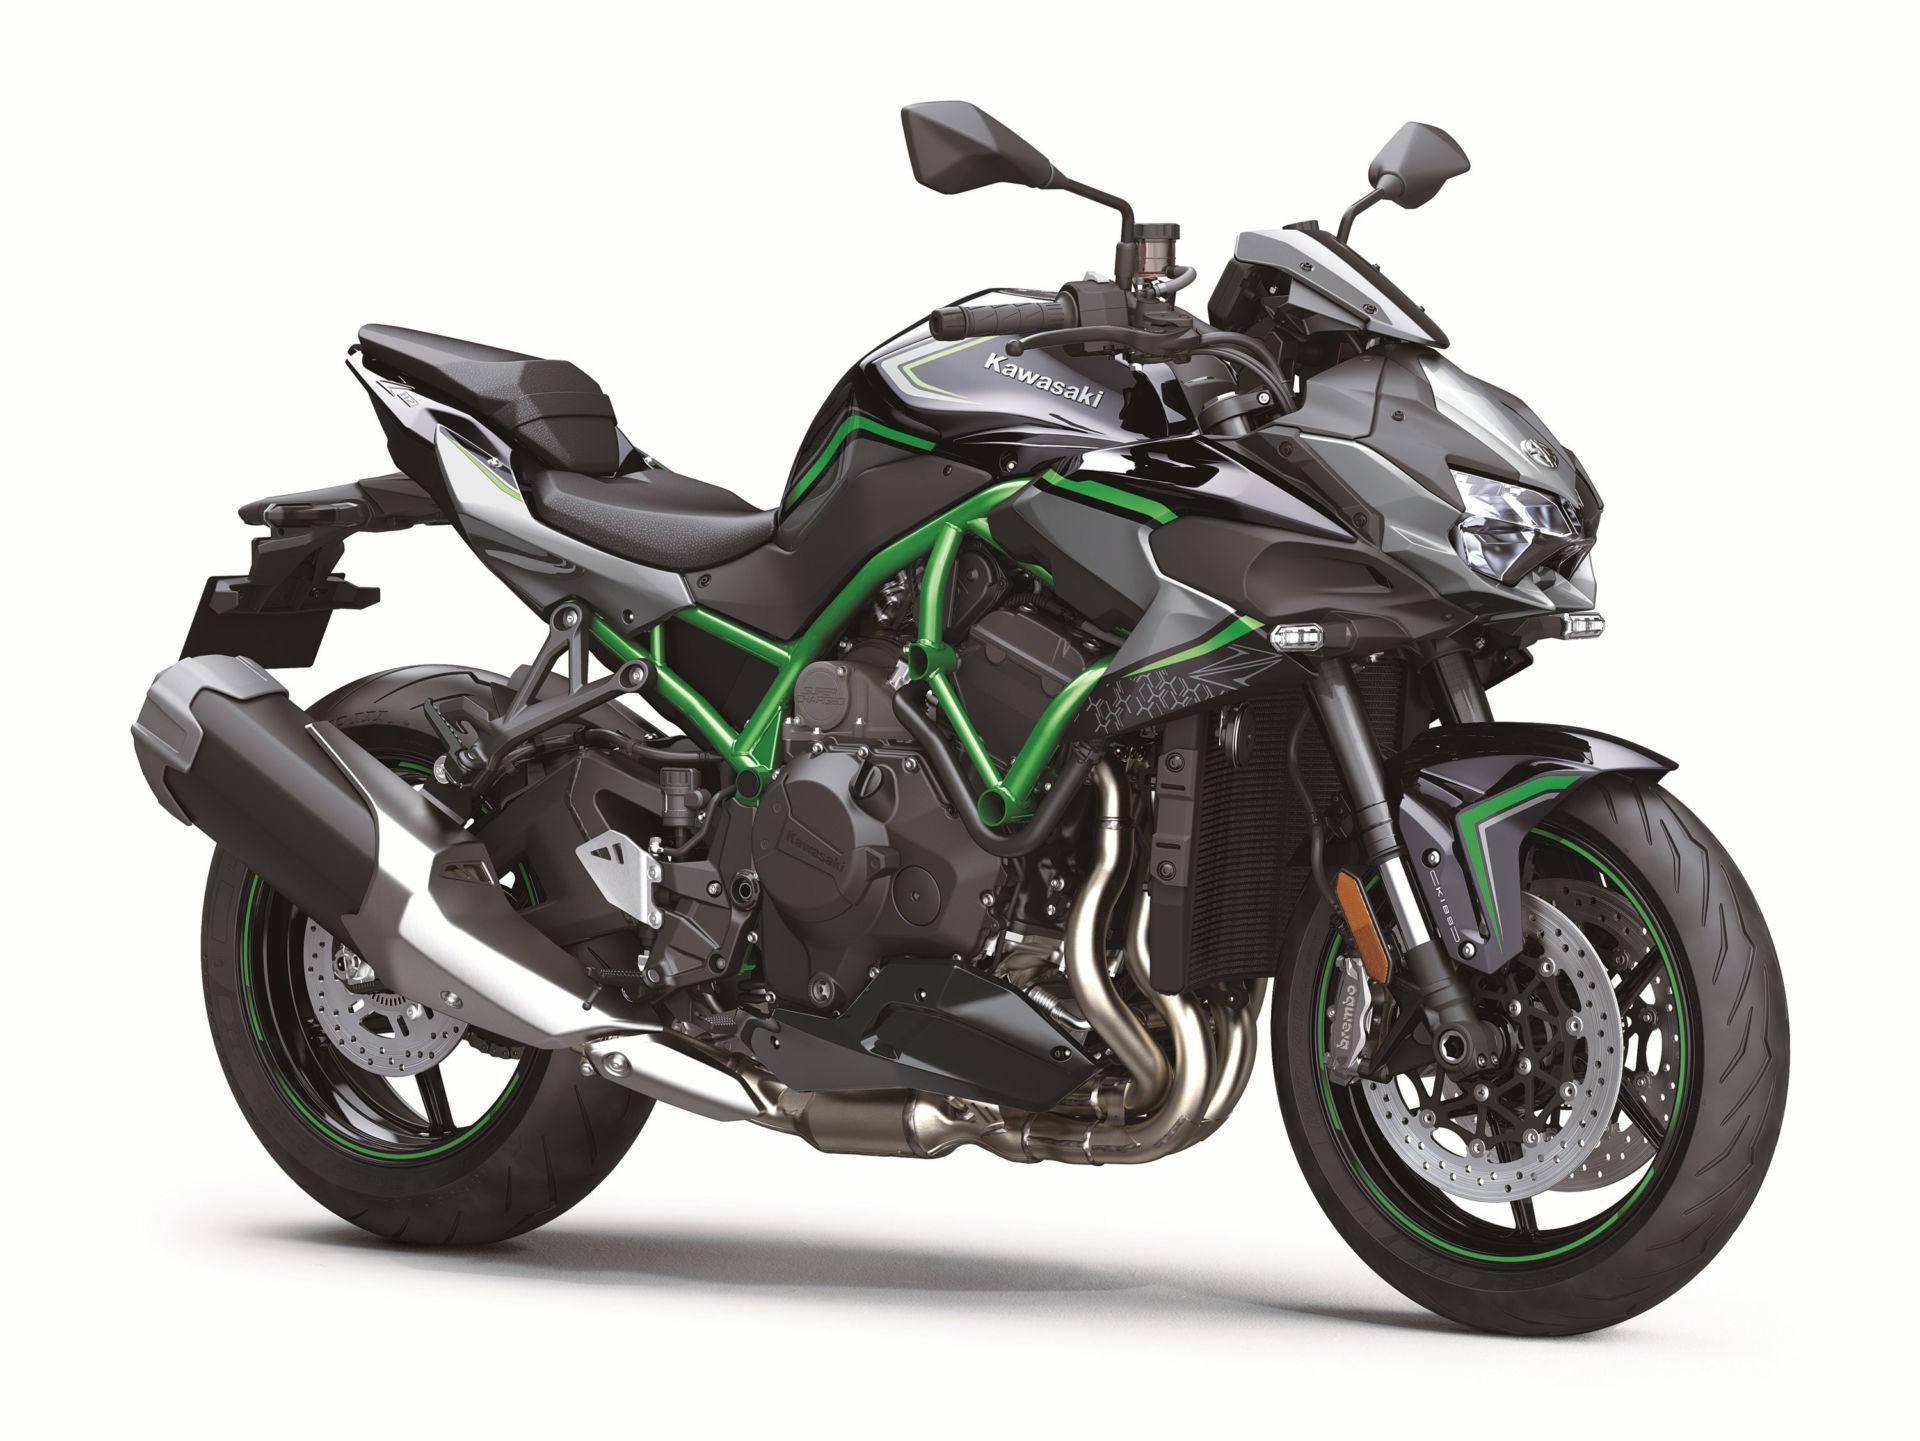 Kawasaki Releases New Z H2 Naked Sportbike For 2020